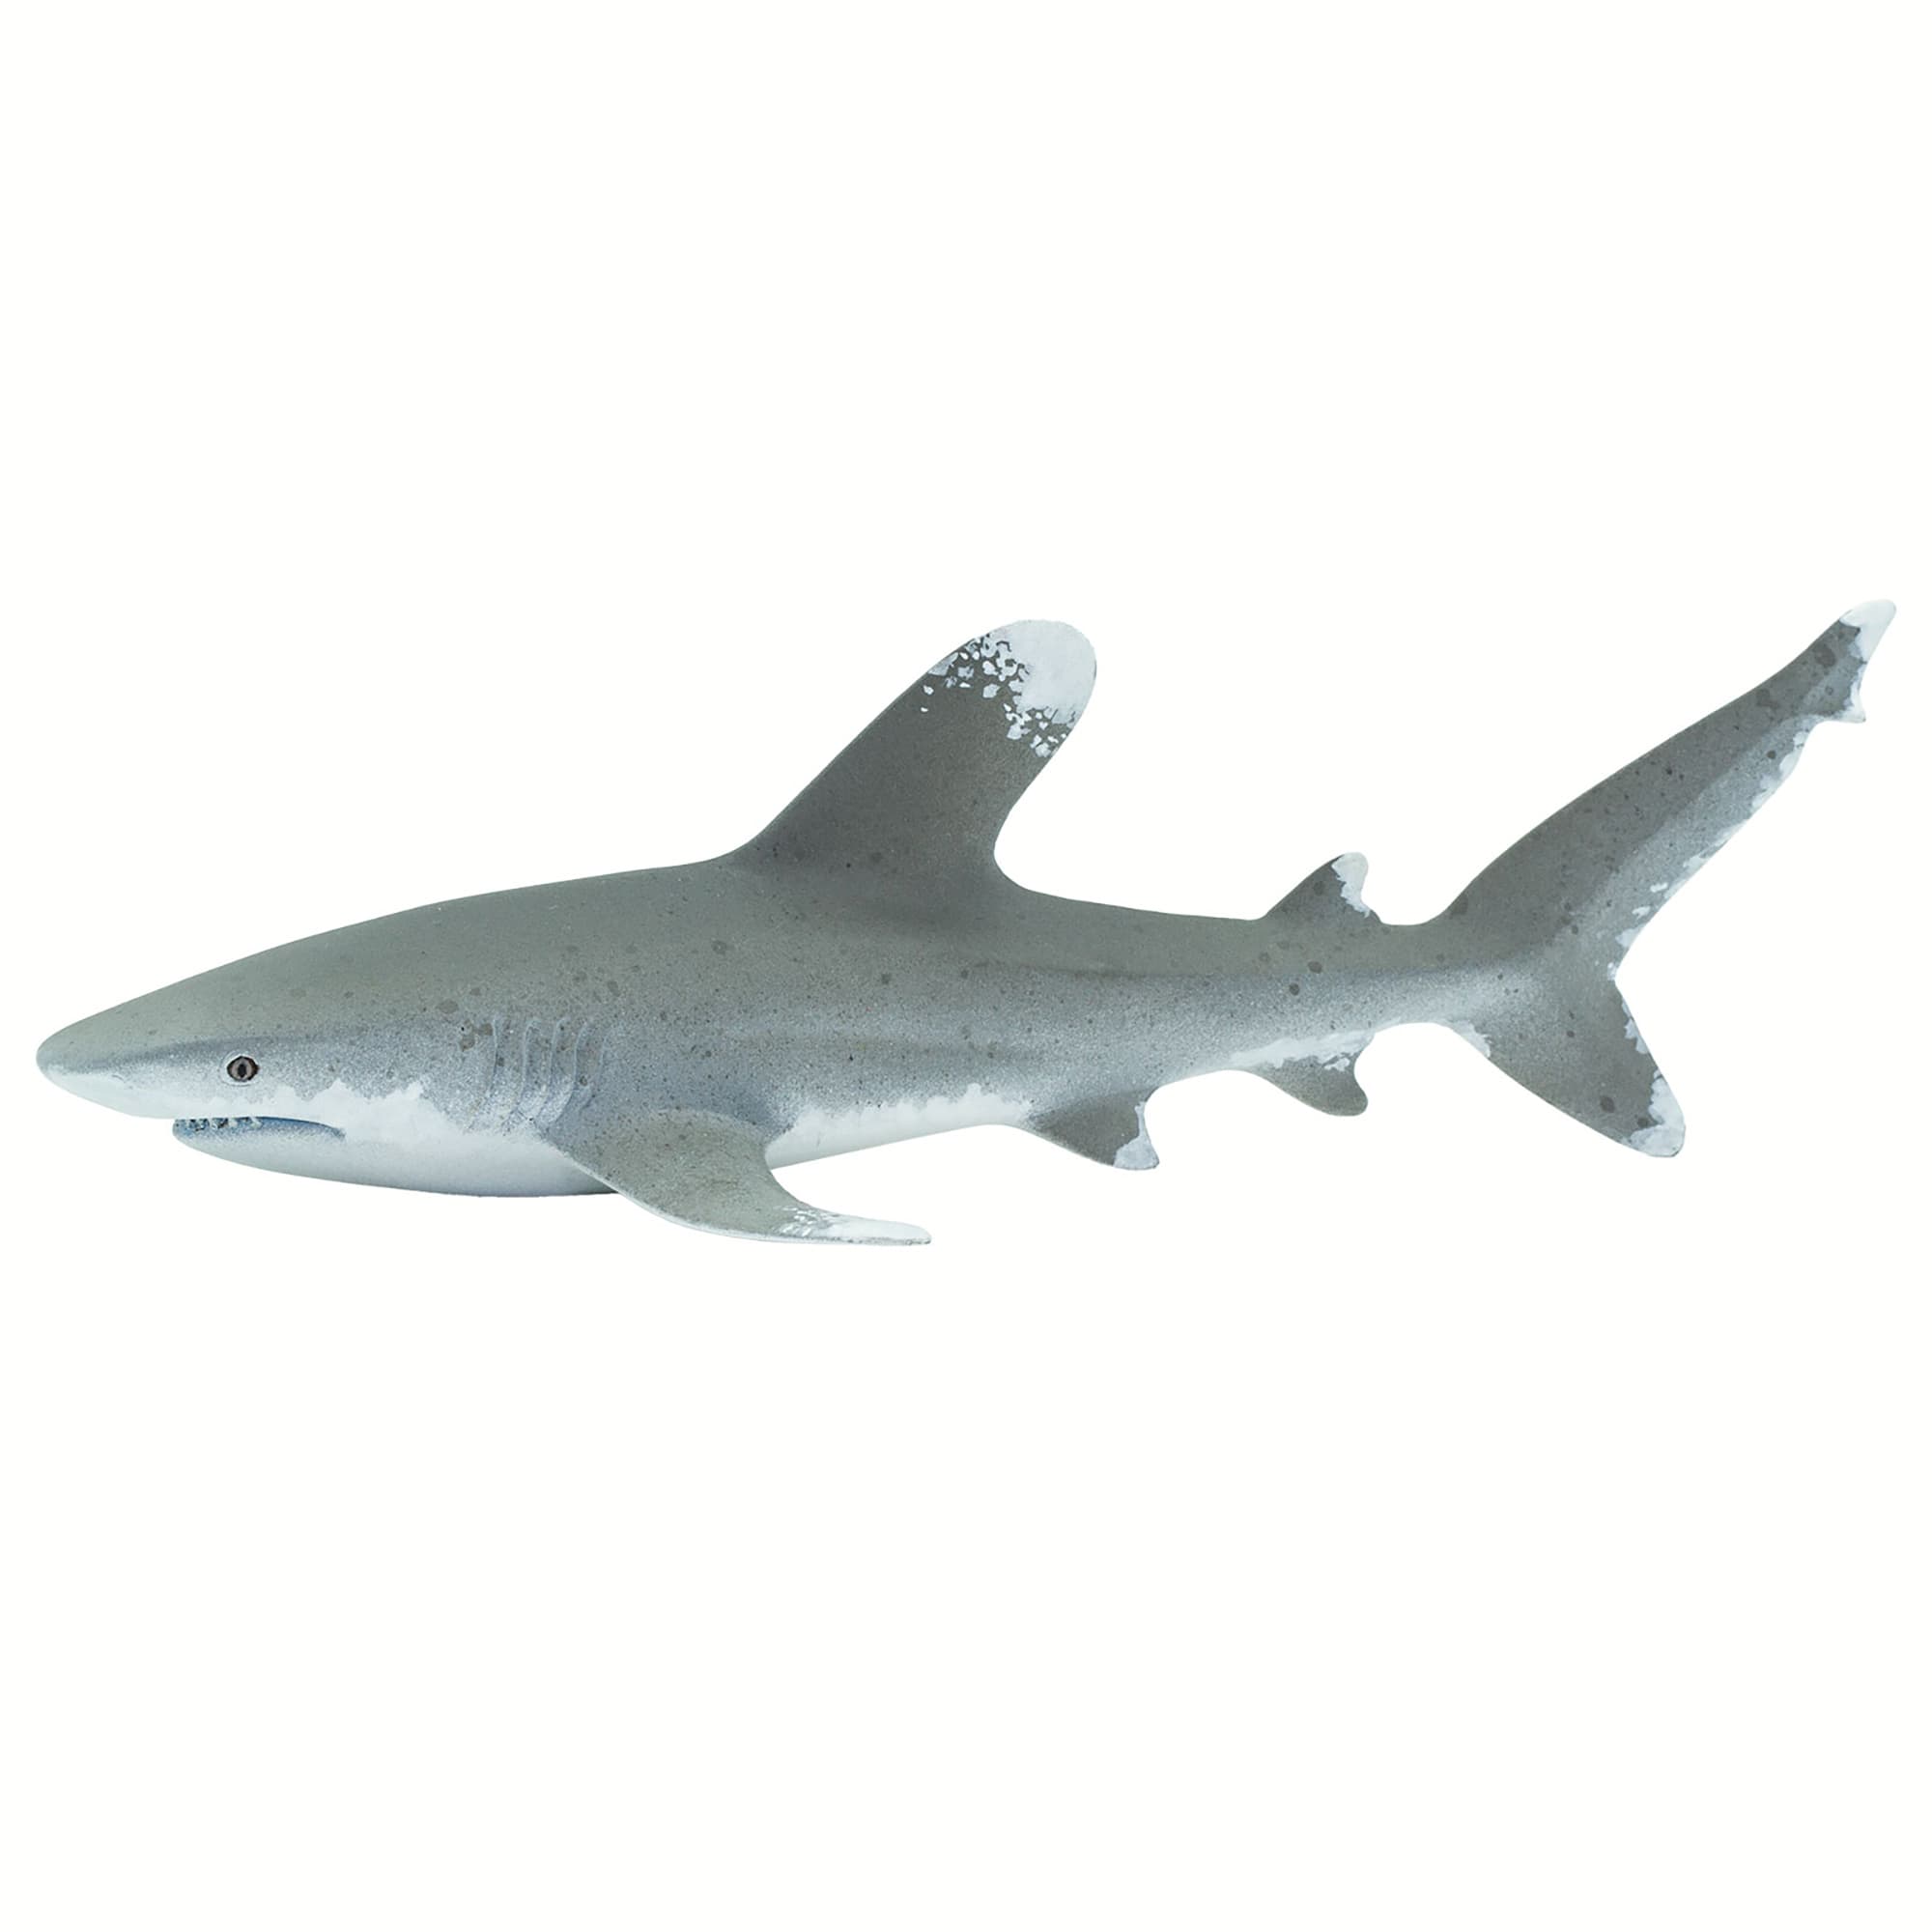 Shark toy - is that toy fish real 